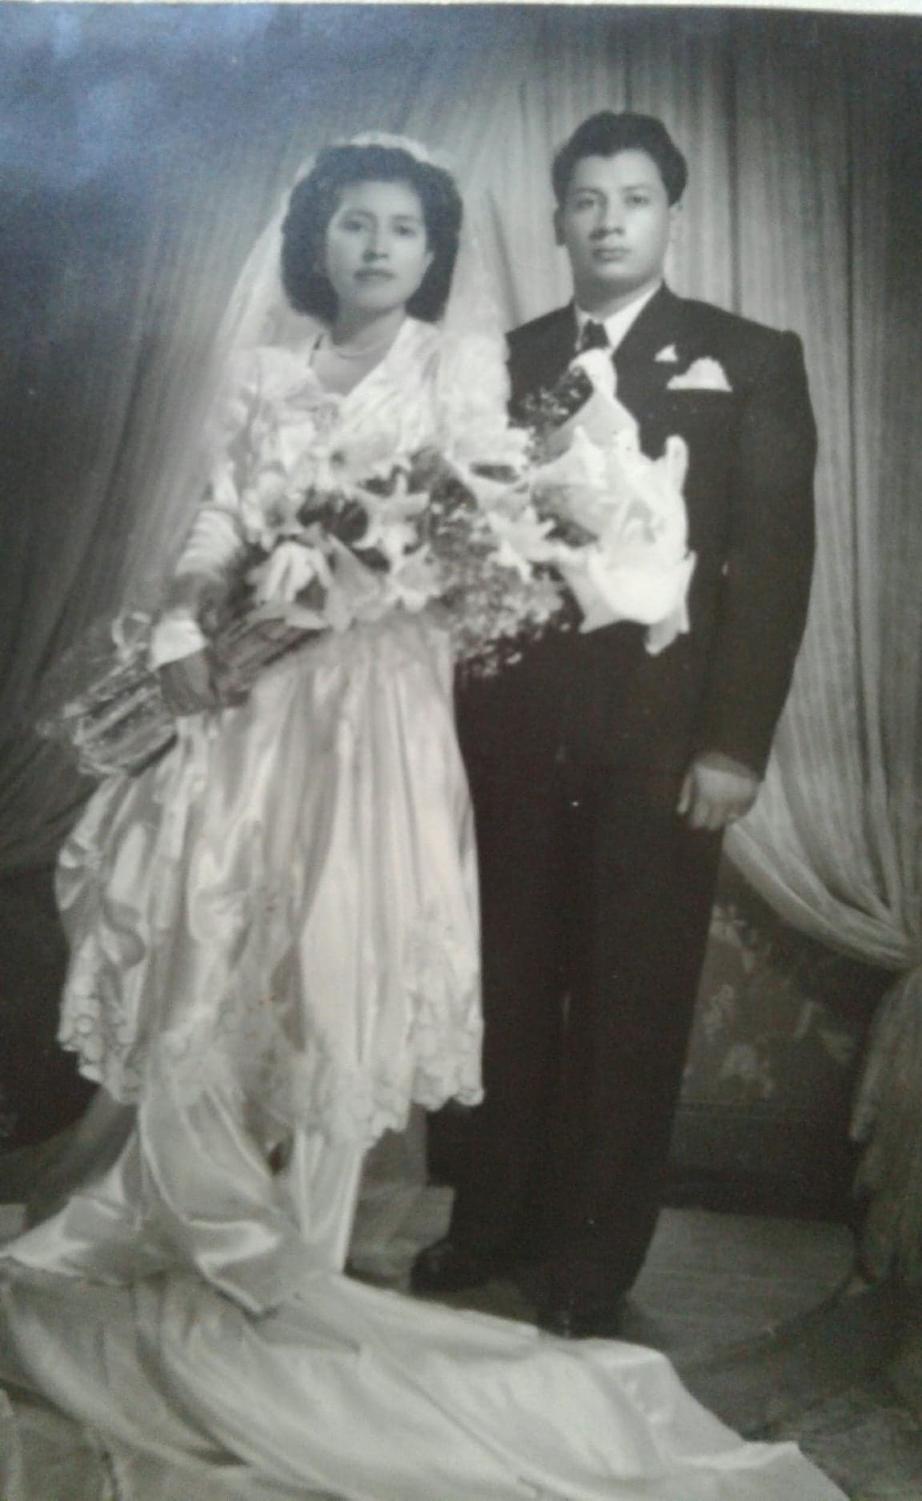 Barajas' mother and father at their wedding.